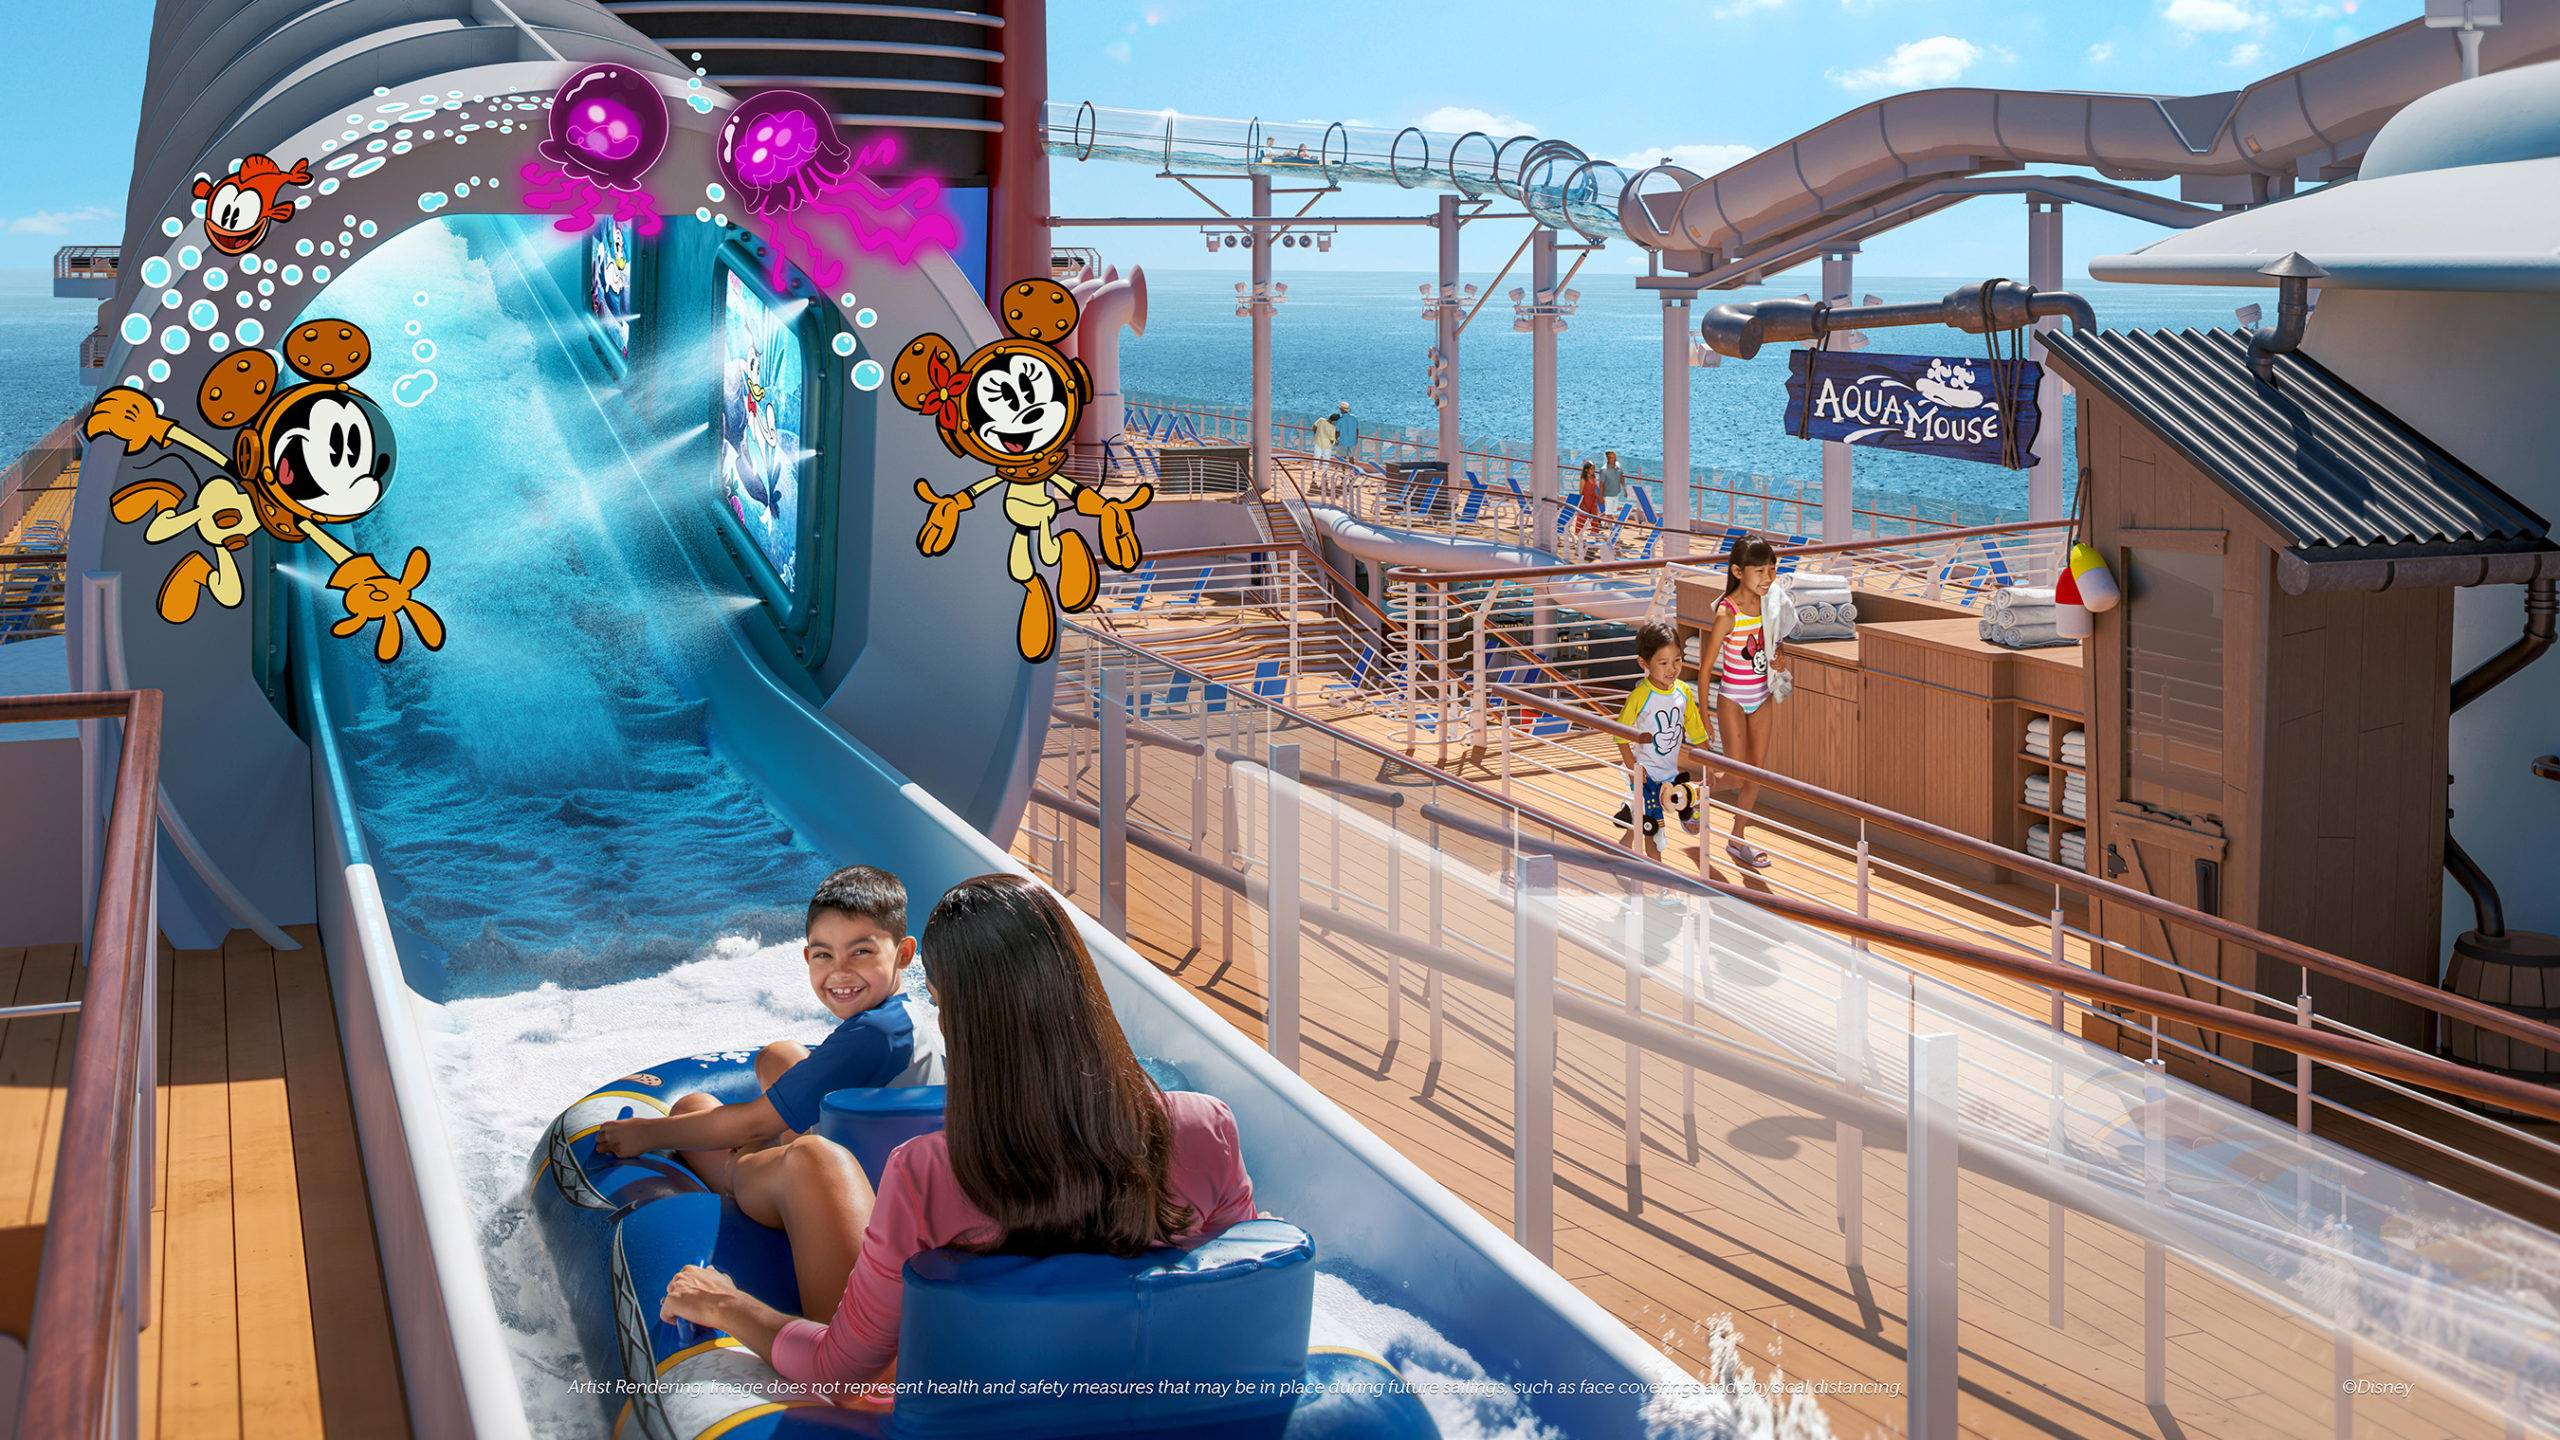 Coming to the Disney Wish - AquaMouse - the first Disney attraction at sea